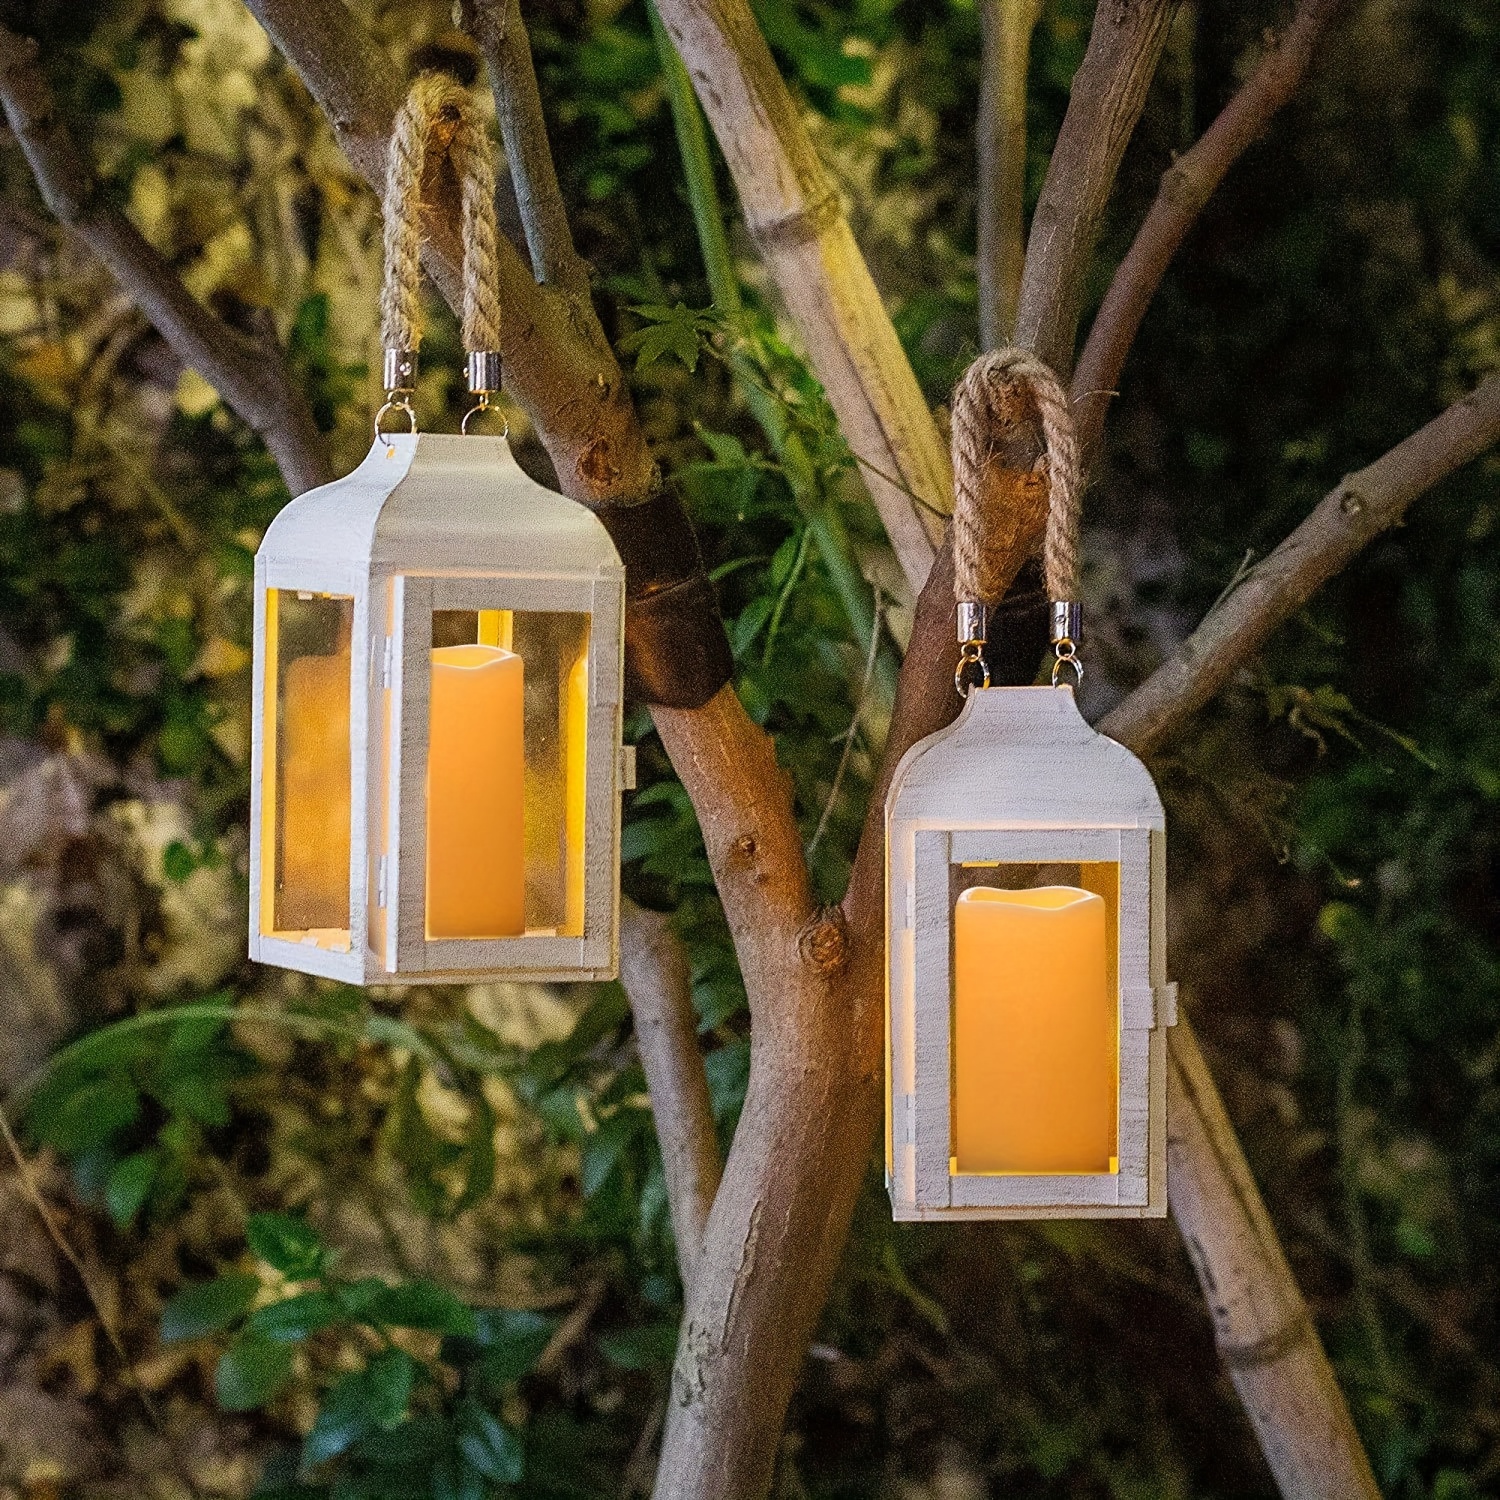 Lanterns suspended from trees.. use led remote control candles